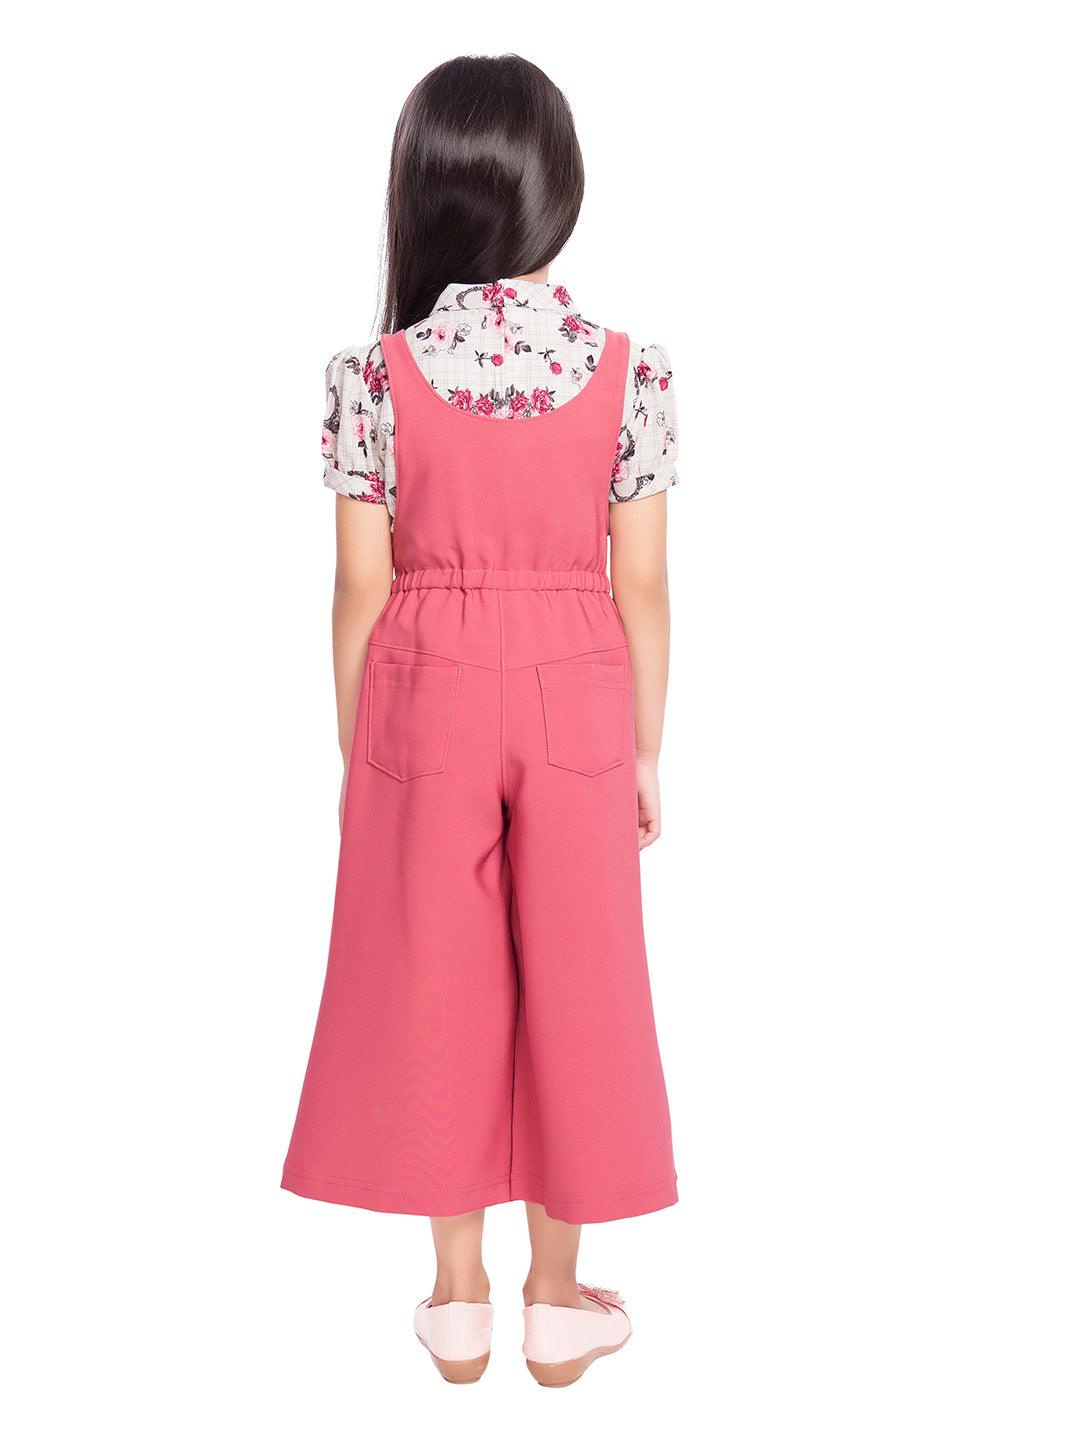 Onion Pink Coloured Culotte Jumpsuit  - 1845 Pink - TINY BABY INDIA shop.tinybaby.in